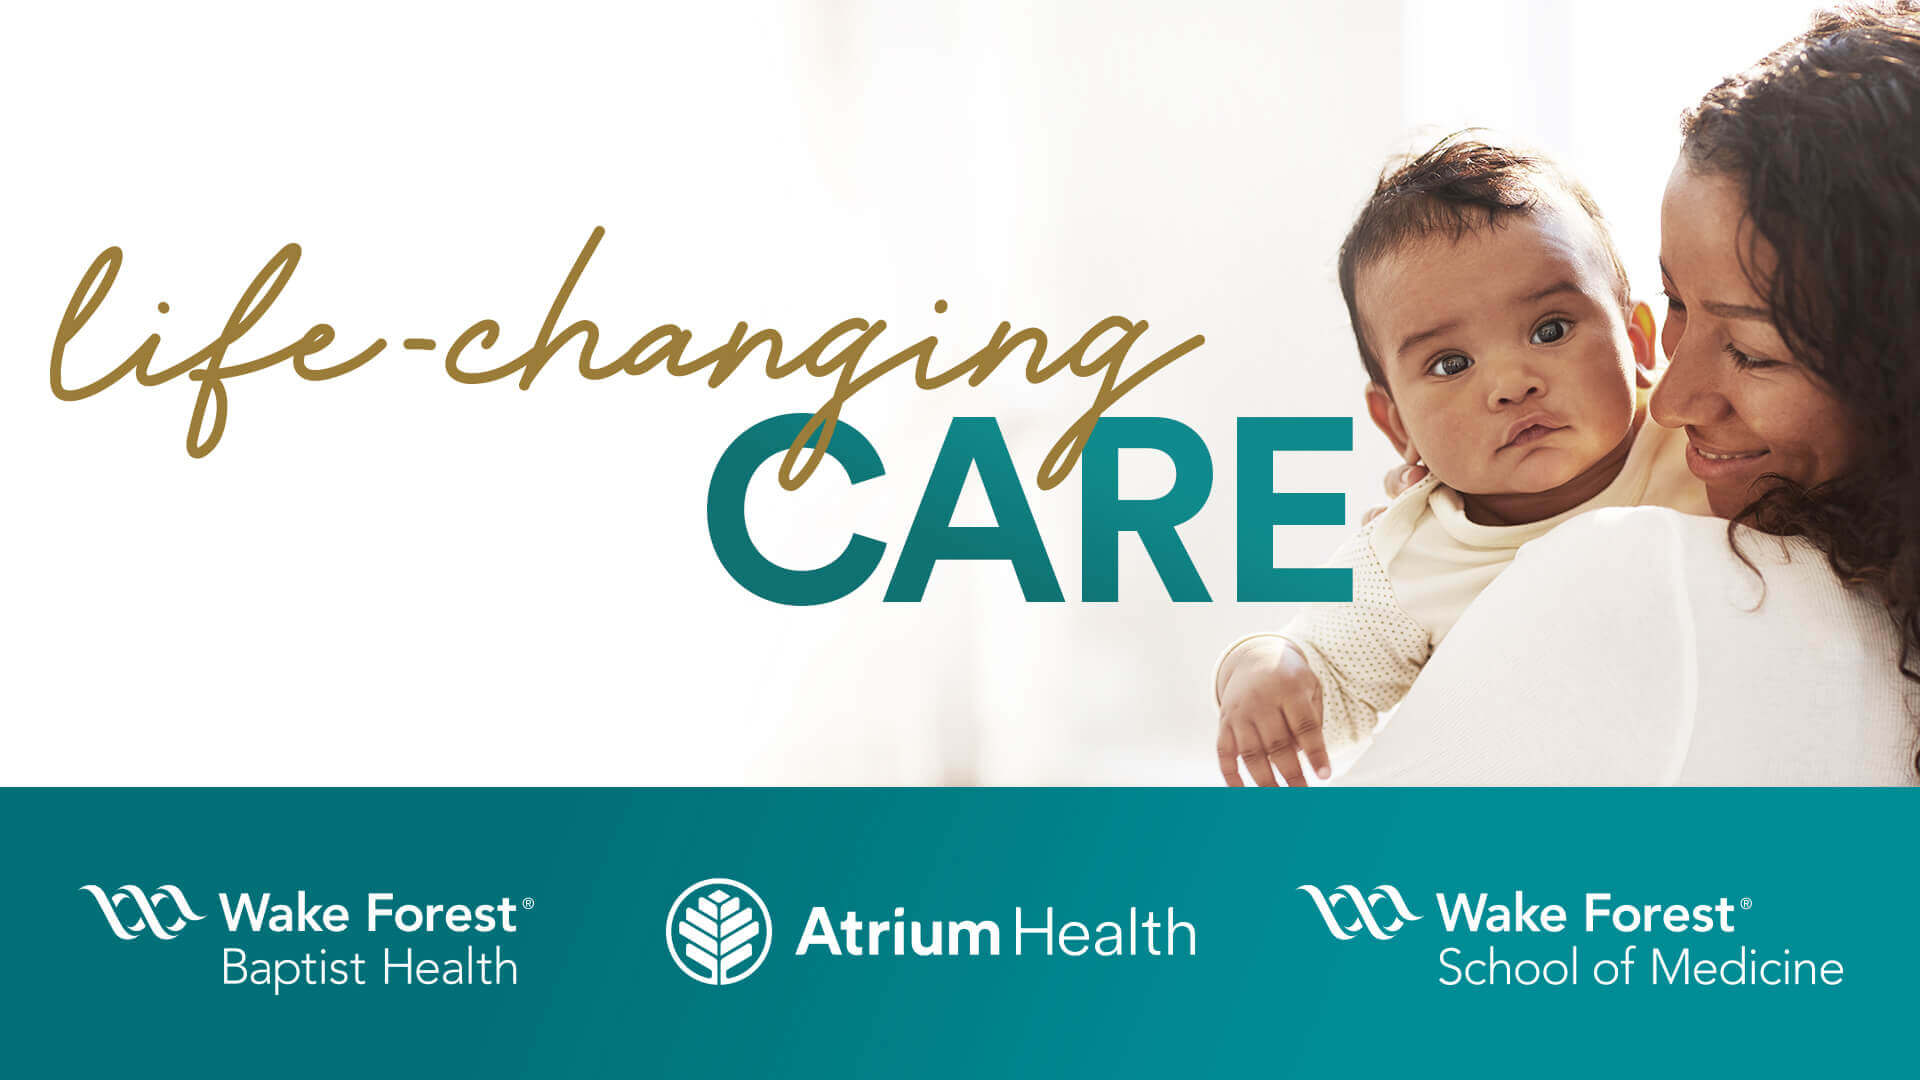 Atrium Health and Wake Forest Baptist Health join together.